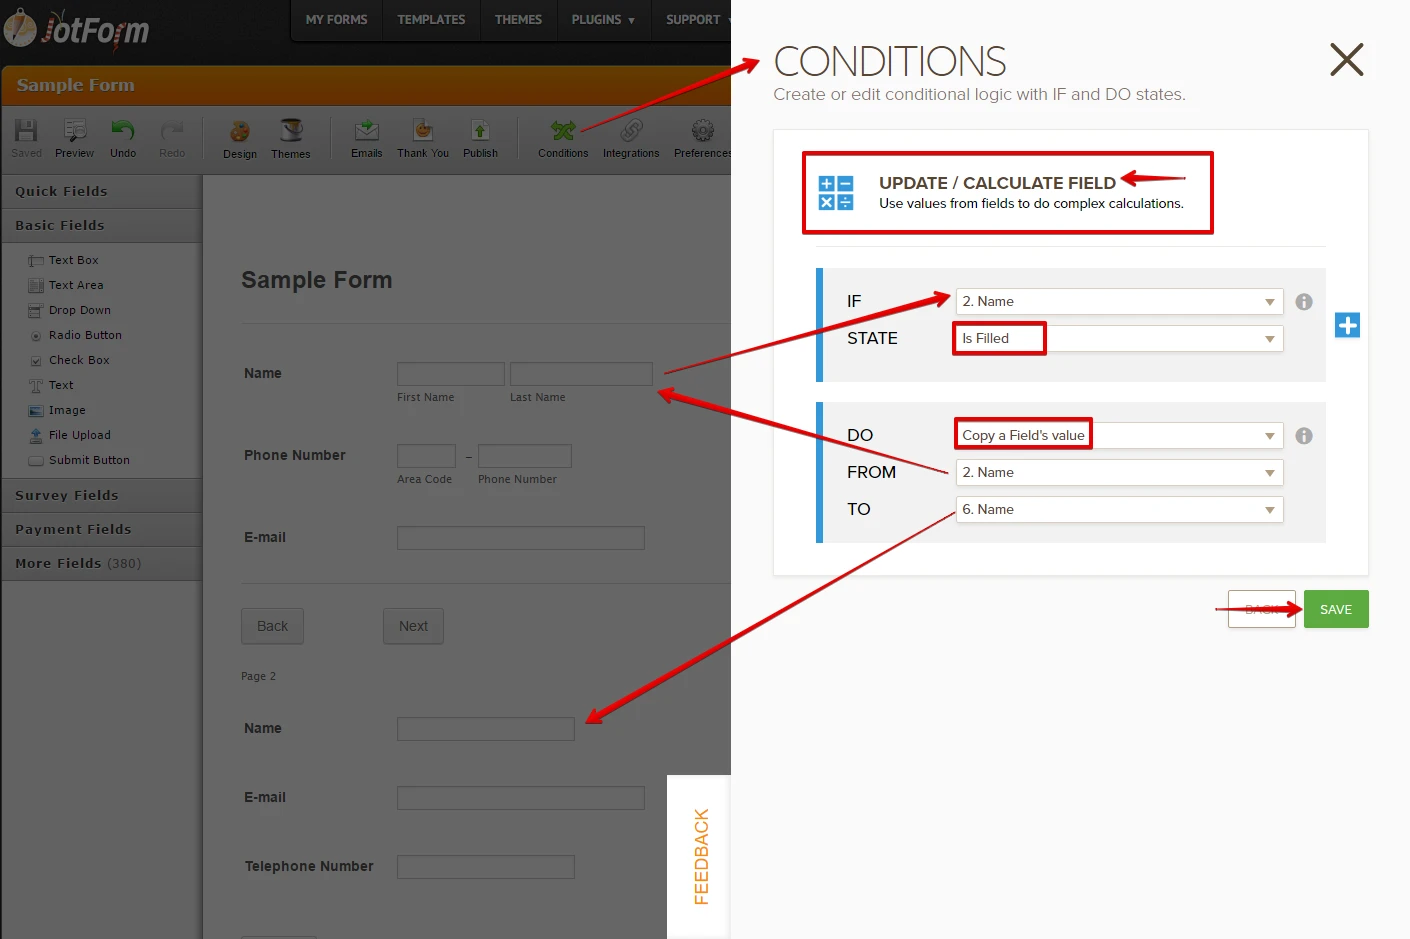 How to populate fields on succeeding pages with values from the previous page(s) of the form? Image 2 Screenshot 41